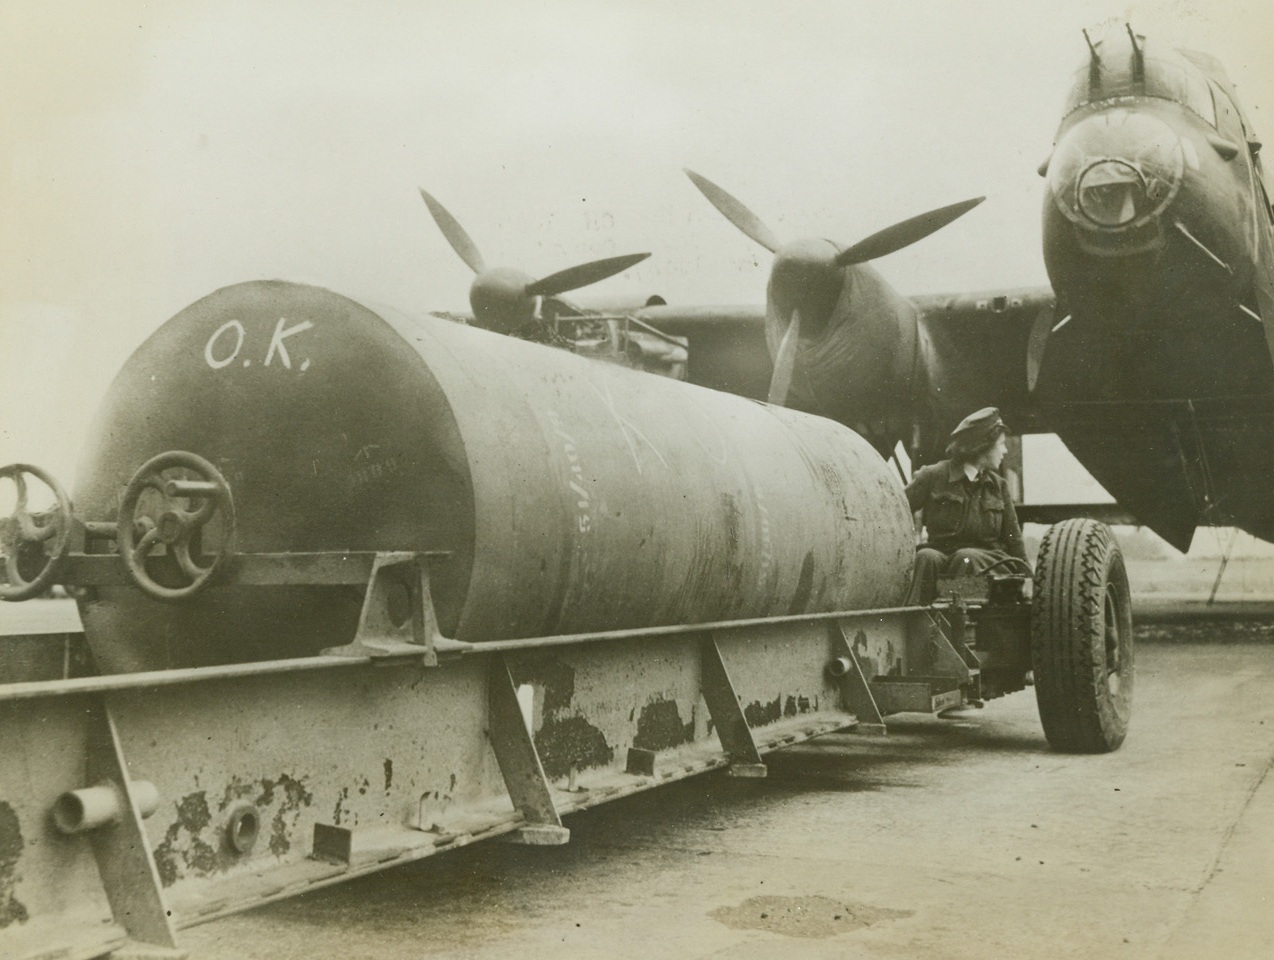 O.K., RAF, Take ‘Er Away, 9/20/1943. Somewhere in England – This big baby, which tips the scales at 8,000 pounds and makes a mess of enemy targets when it falls, is very much of “O.K.” The giant missile is backed up in front of the RAF Lancaster bomber that will soon carry it away on a night raid over Axis territory. Credit: ACME;